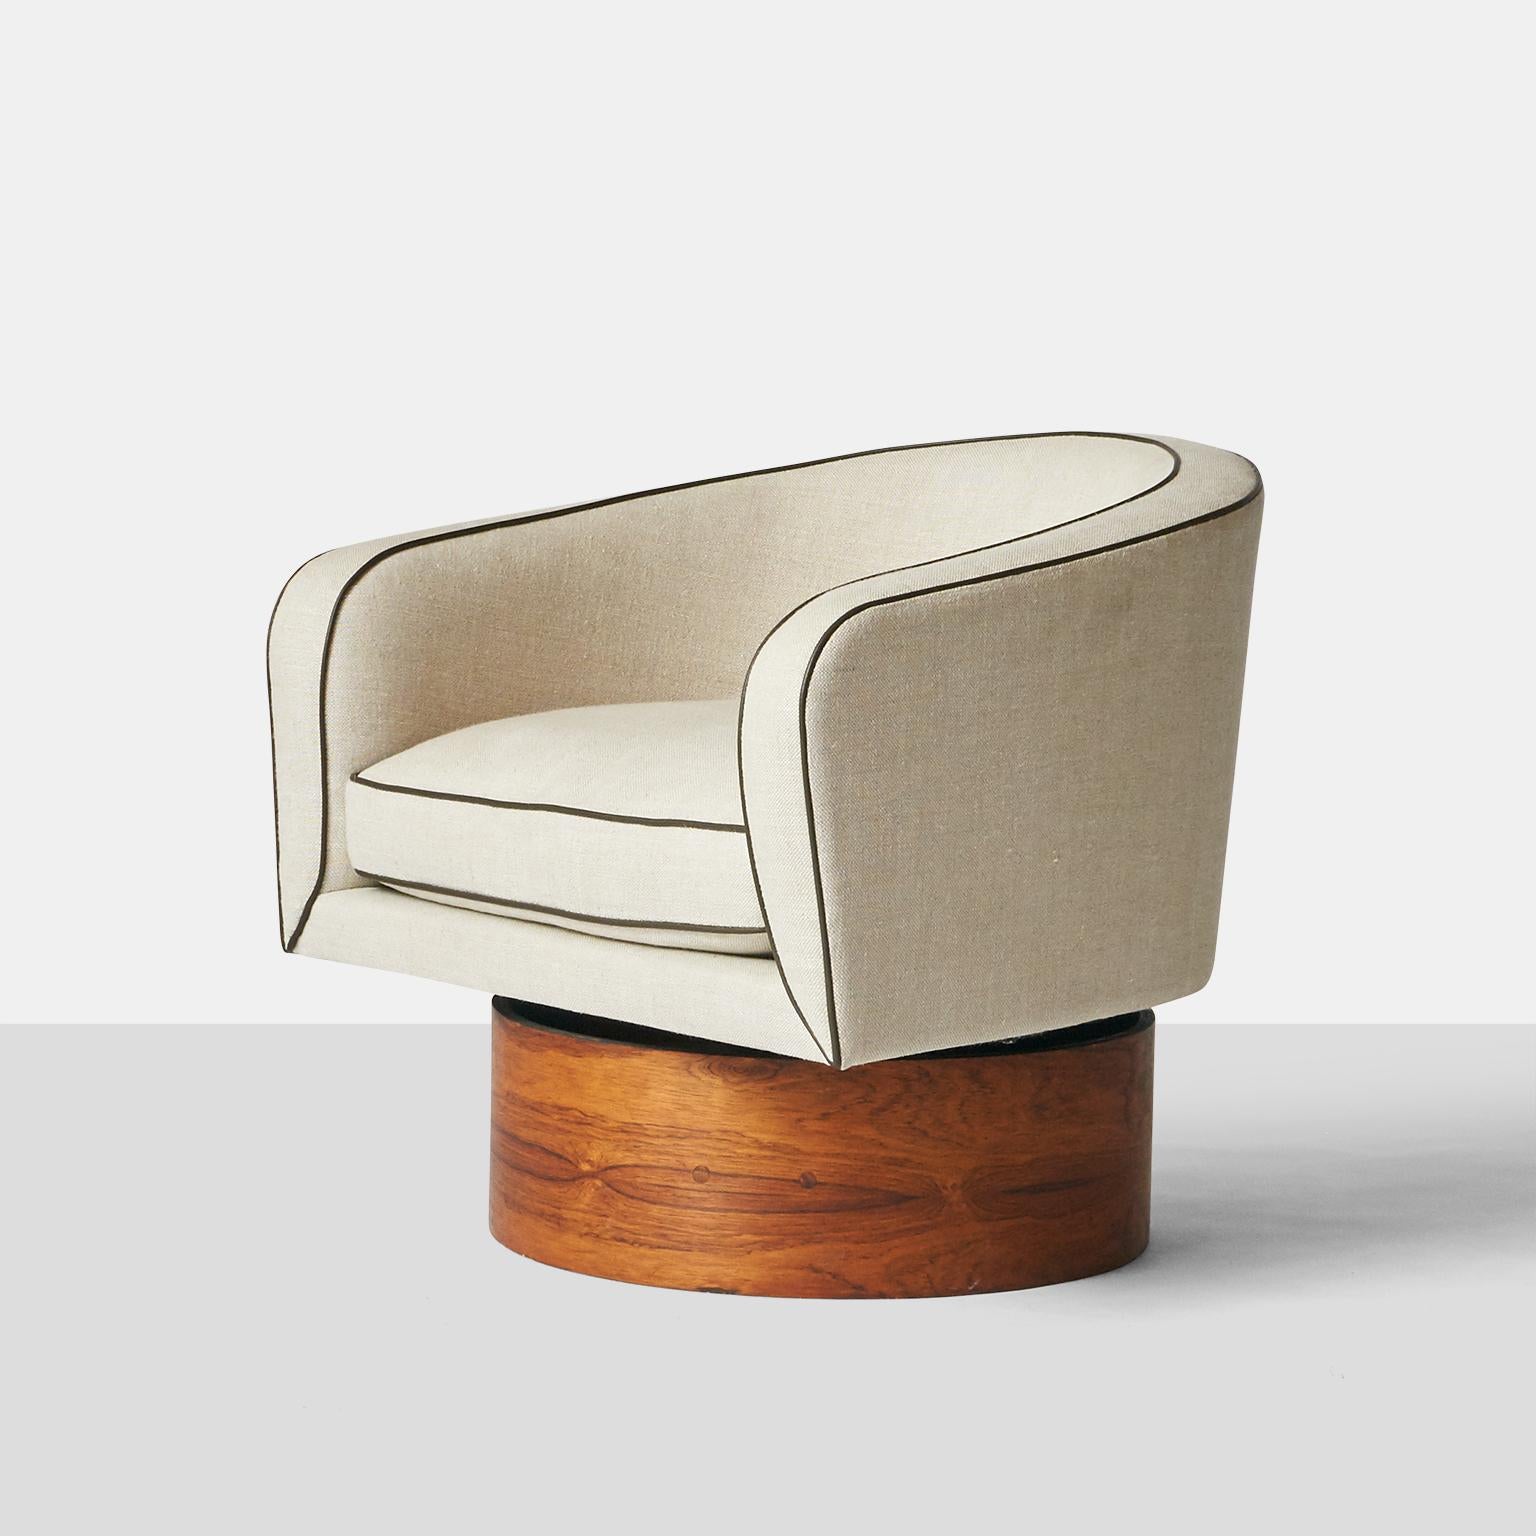 A tall, Barrel shaped club chair by Milo Baughman for Thayer Coggin. Features a high, cushioned seat, and round walnut base. Shown in beige linen, with contrasting brown piping.